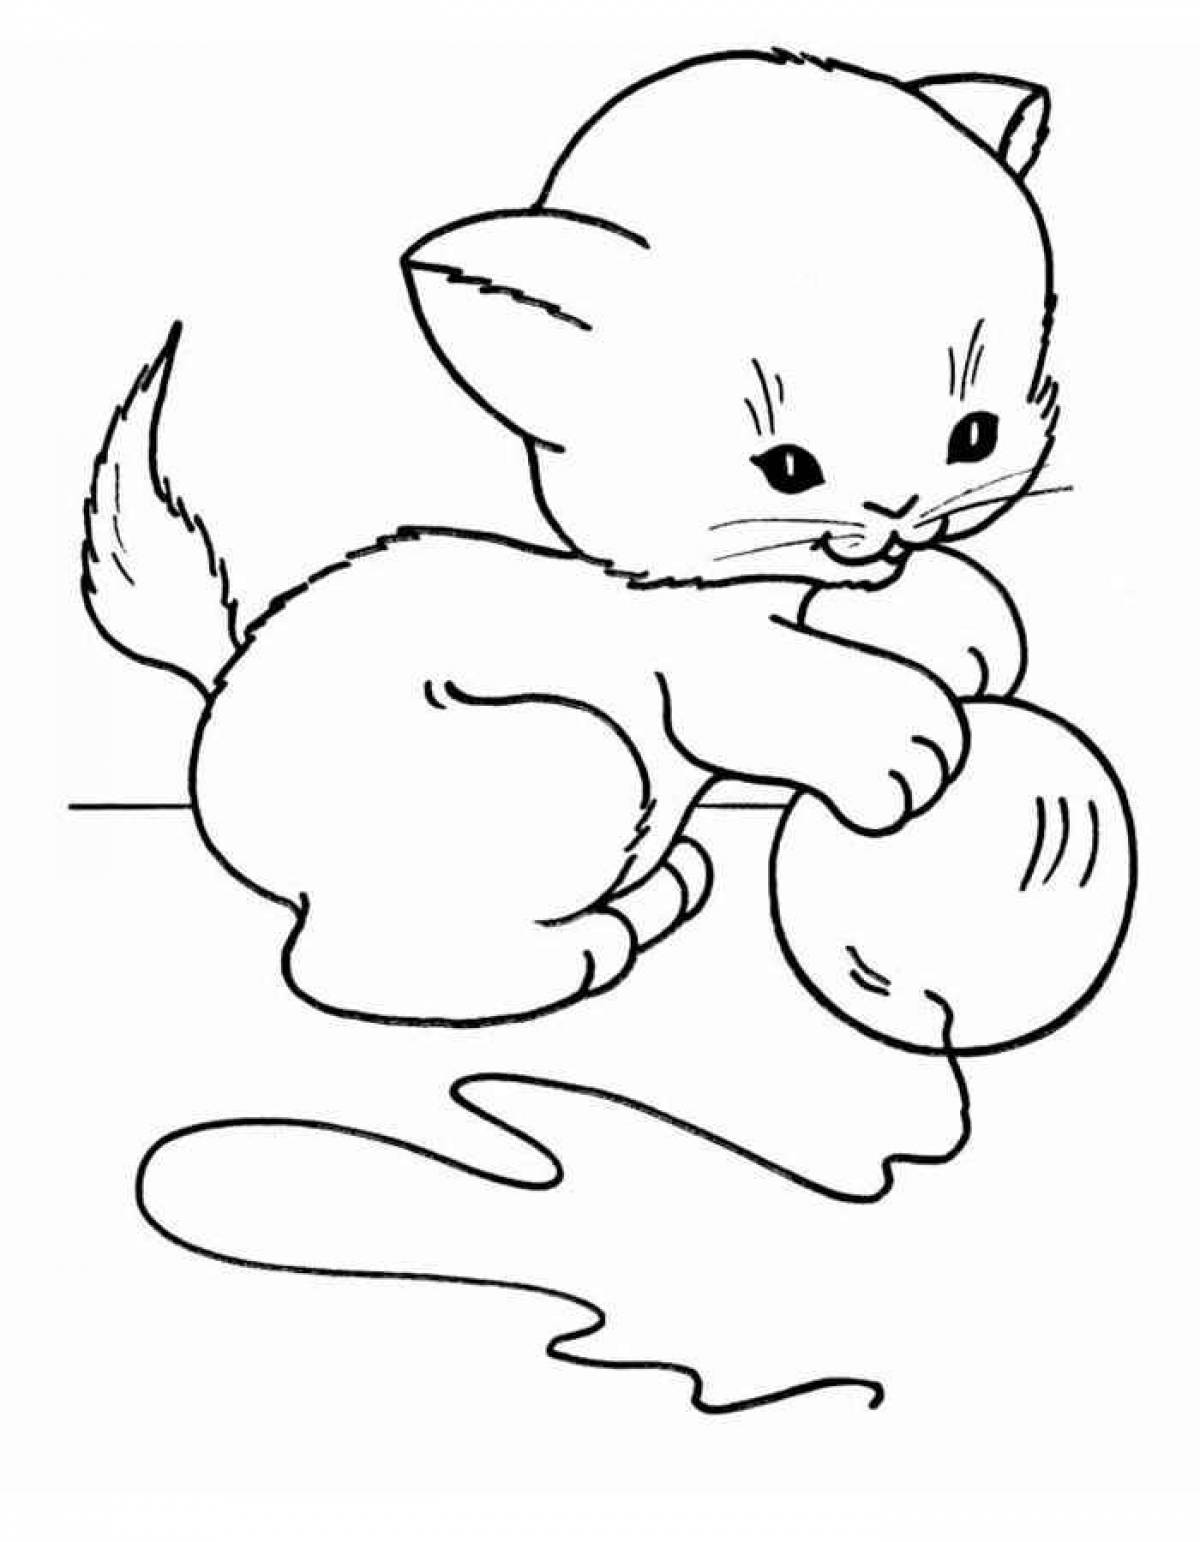 Funny kitten coloring book for kids